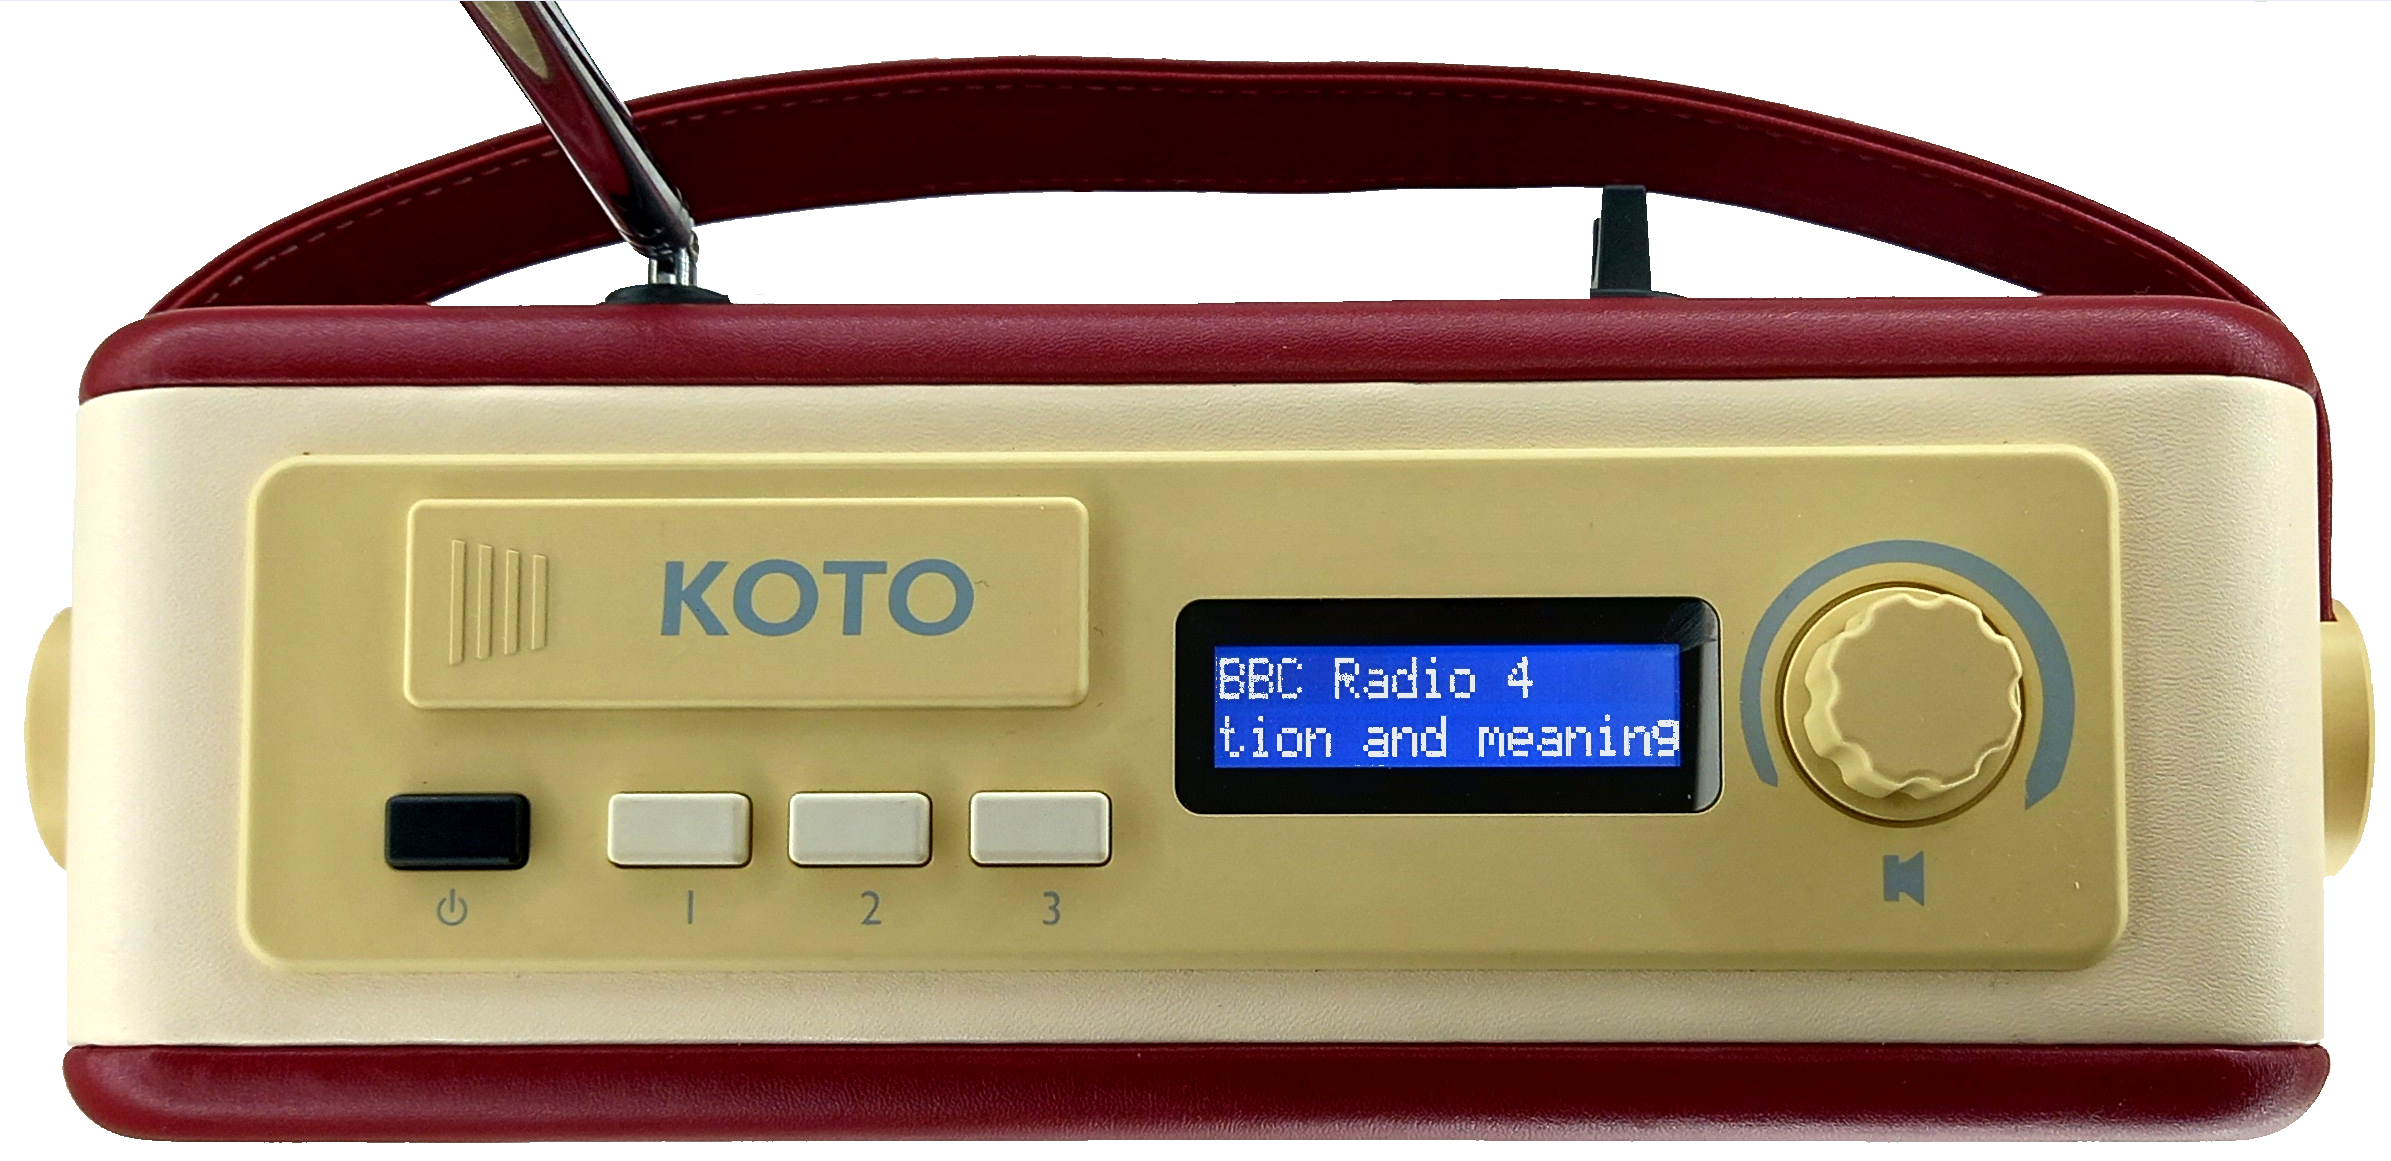 Top down view of KOTO easy to use radio